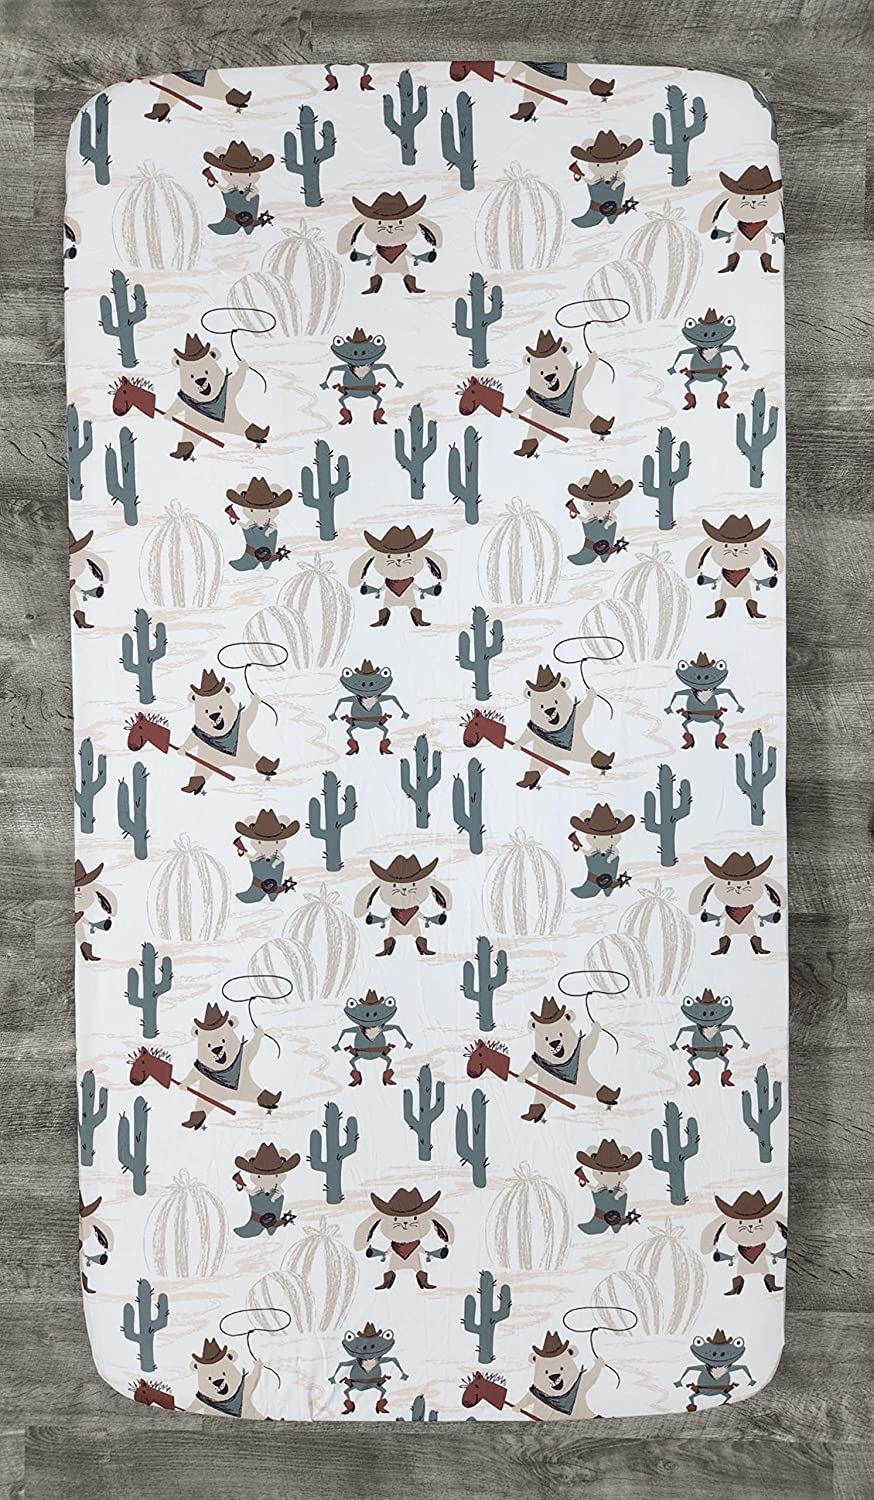 Dear Baby Gear Deluxe Crib Sheet Cotton Polyester Baby Crib Sheets – Wild West Cowboy Critters and Cactus, Exclusive Print, 28 x 52 x 10 Inches